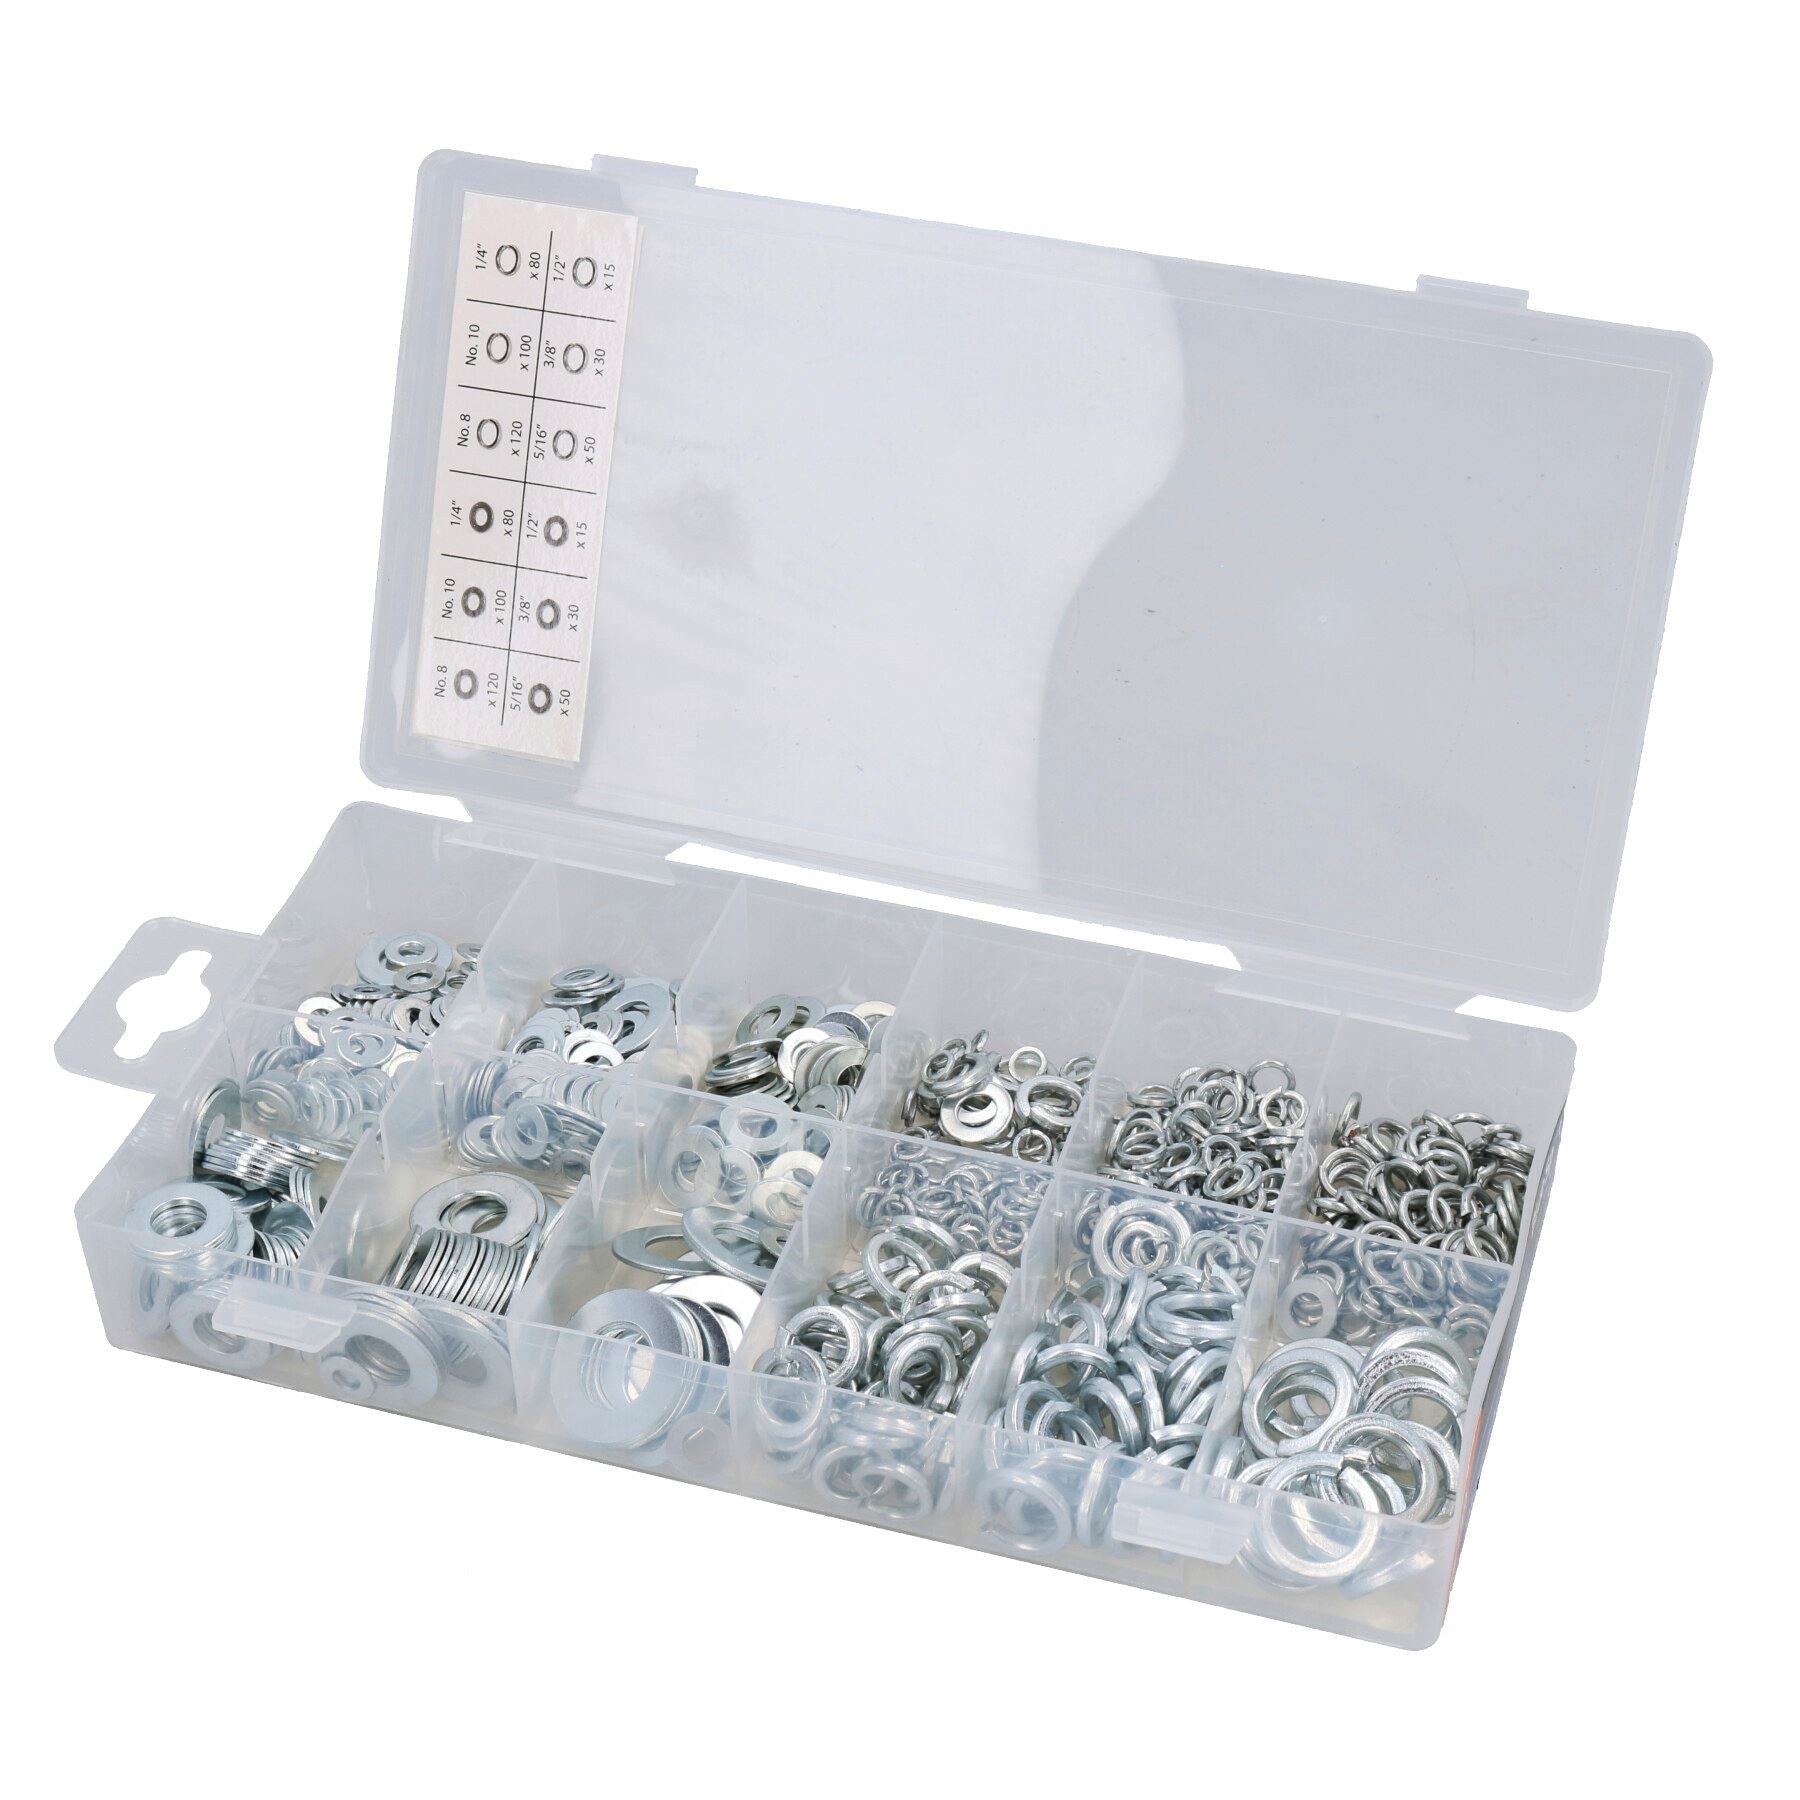 Assorted Flat and Spring Washer Assortment Set Metric + Imperial 790pc Kit